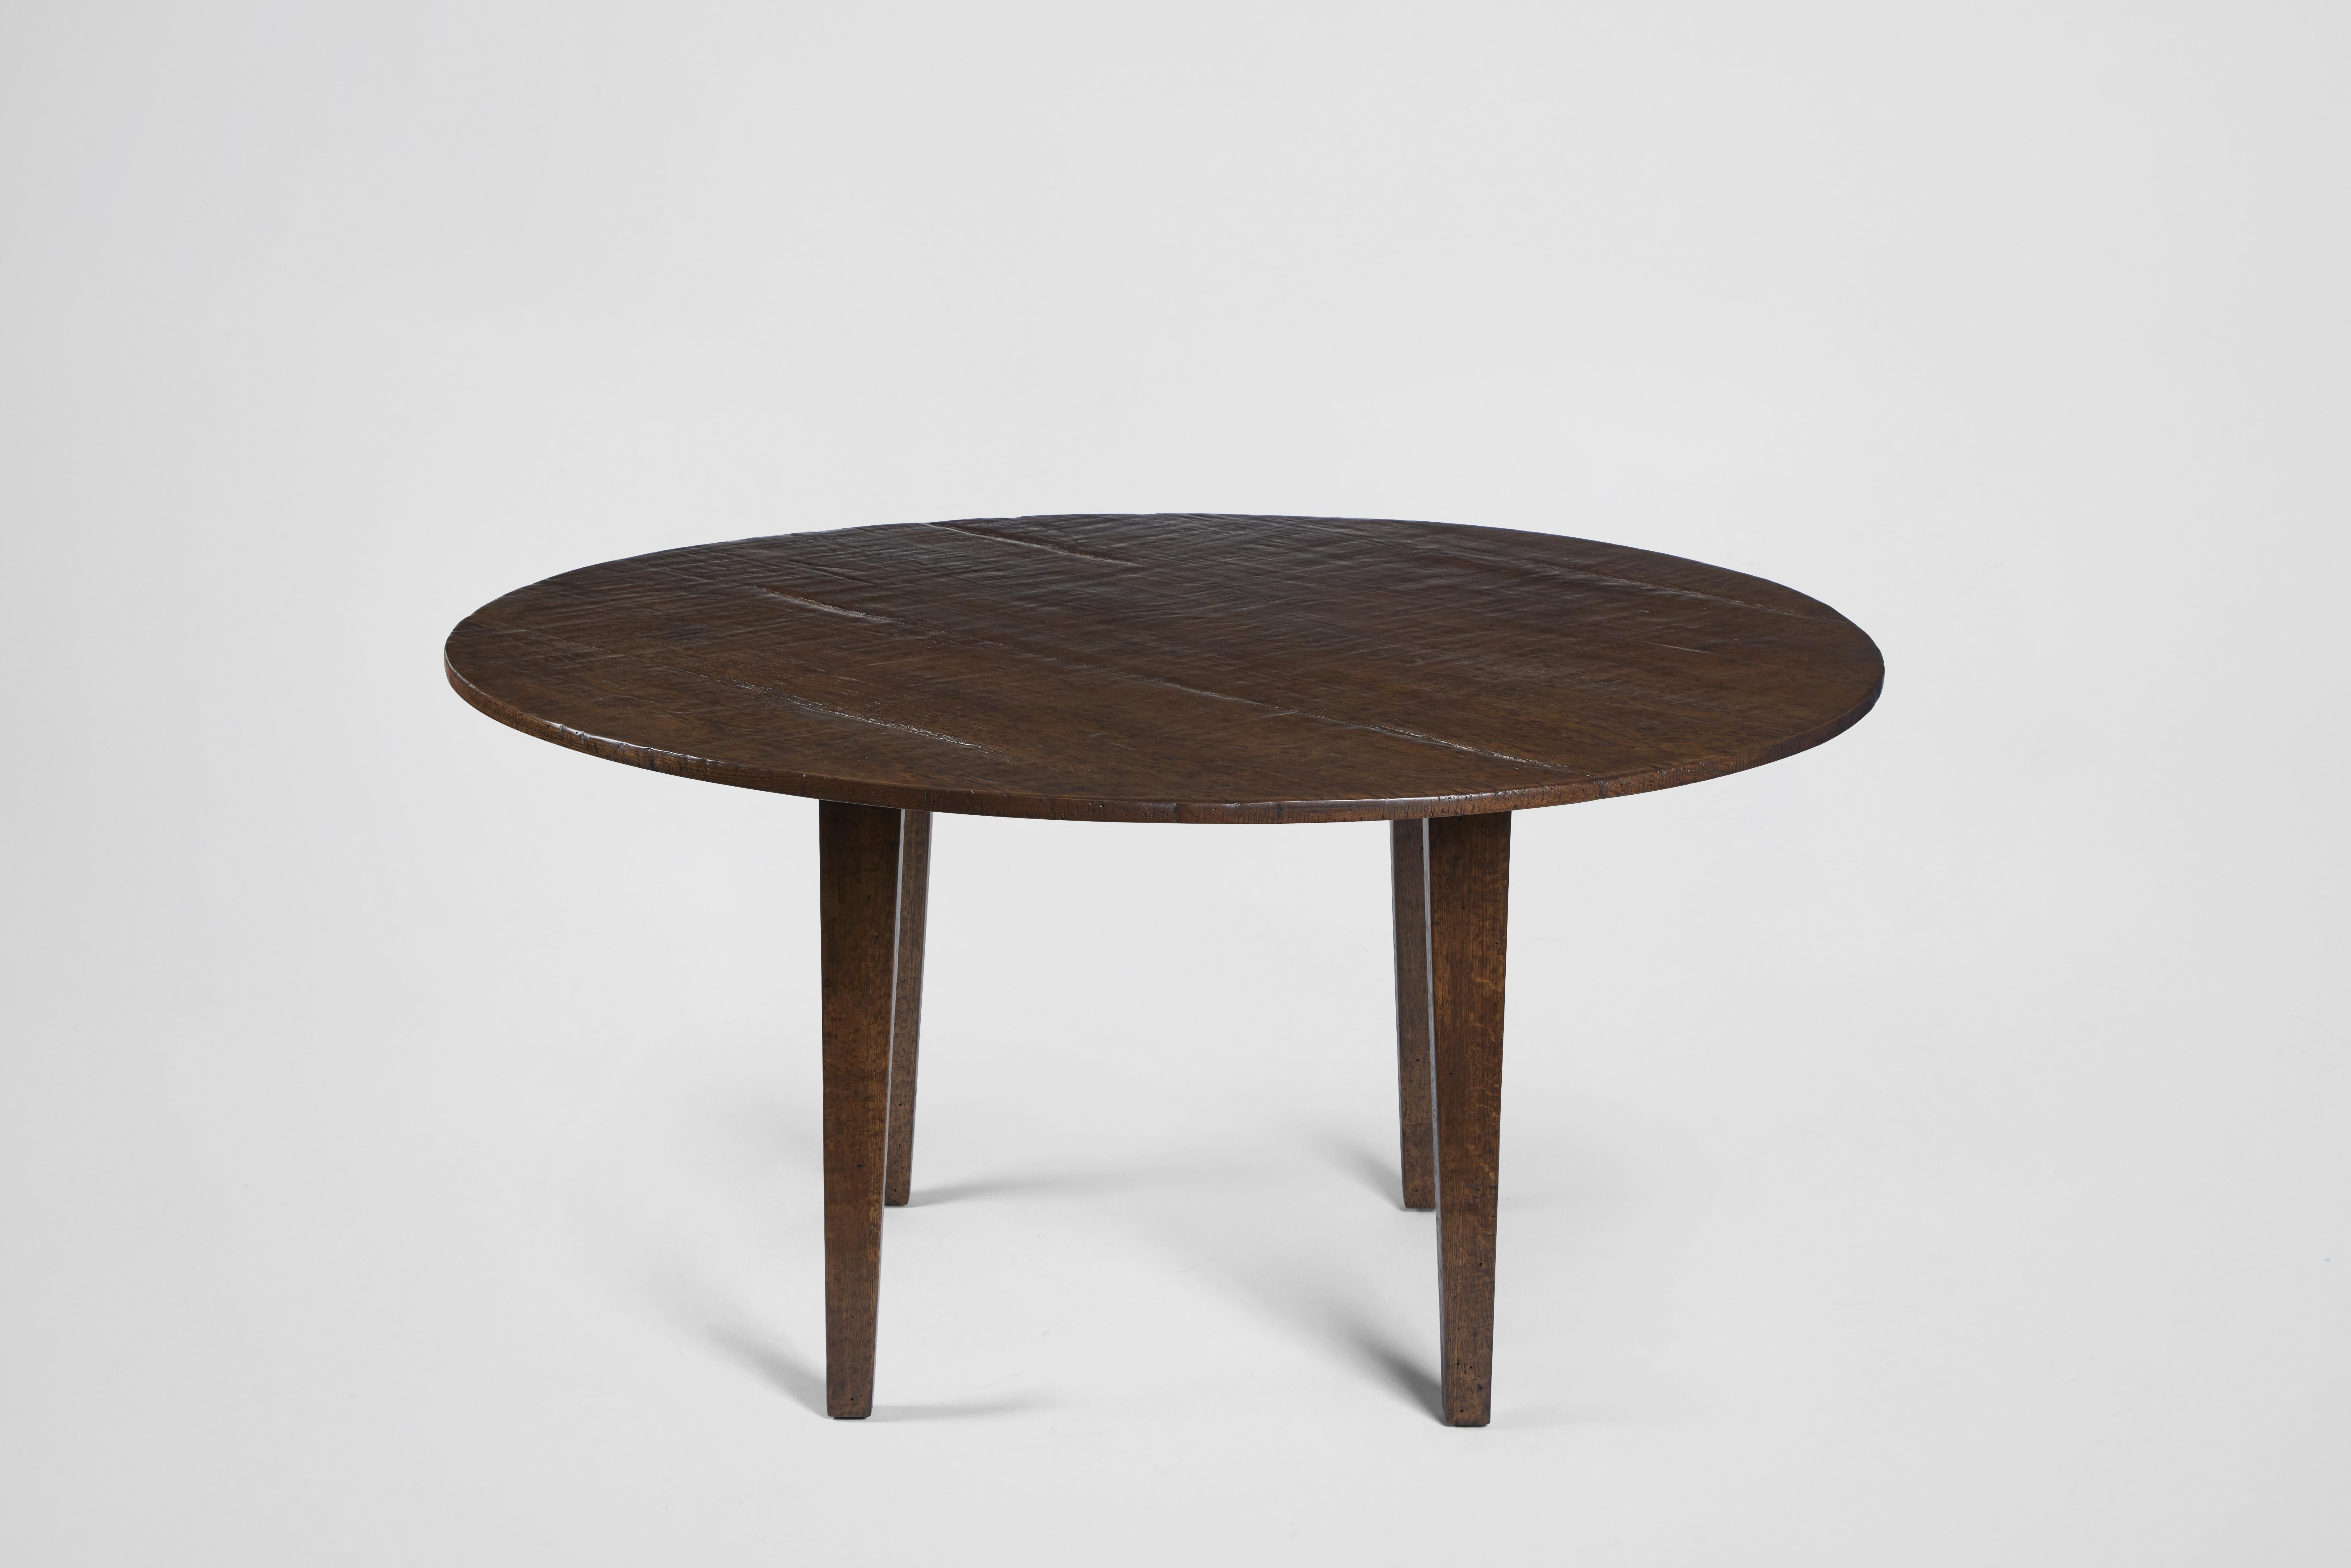 The classic round dining table meets old world beauty with this unique custom finish. The table's rustic finish highlights the natural grain and beauty of the wood for an old world, lived in feel. Features a plank style round tabletop and tapered